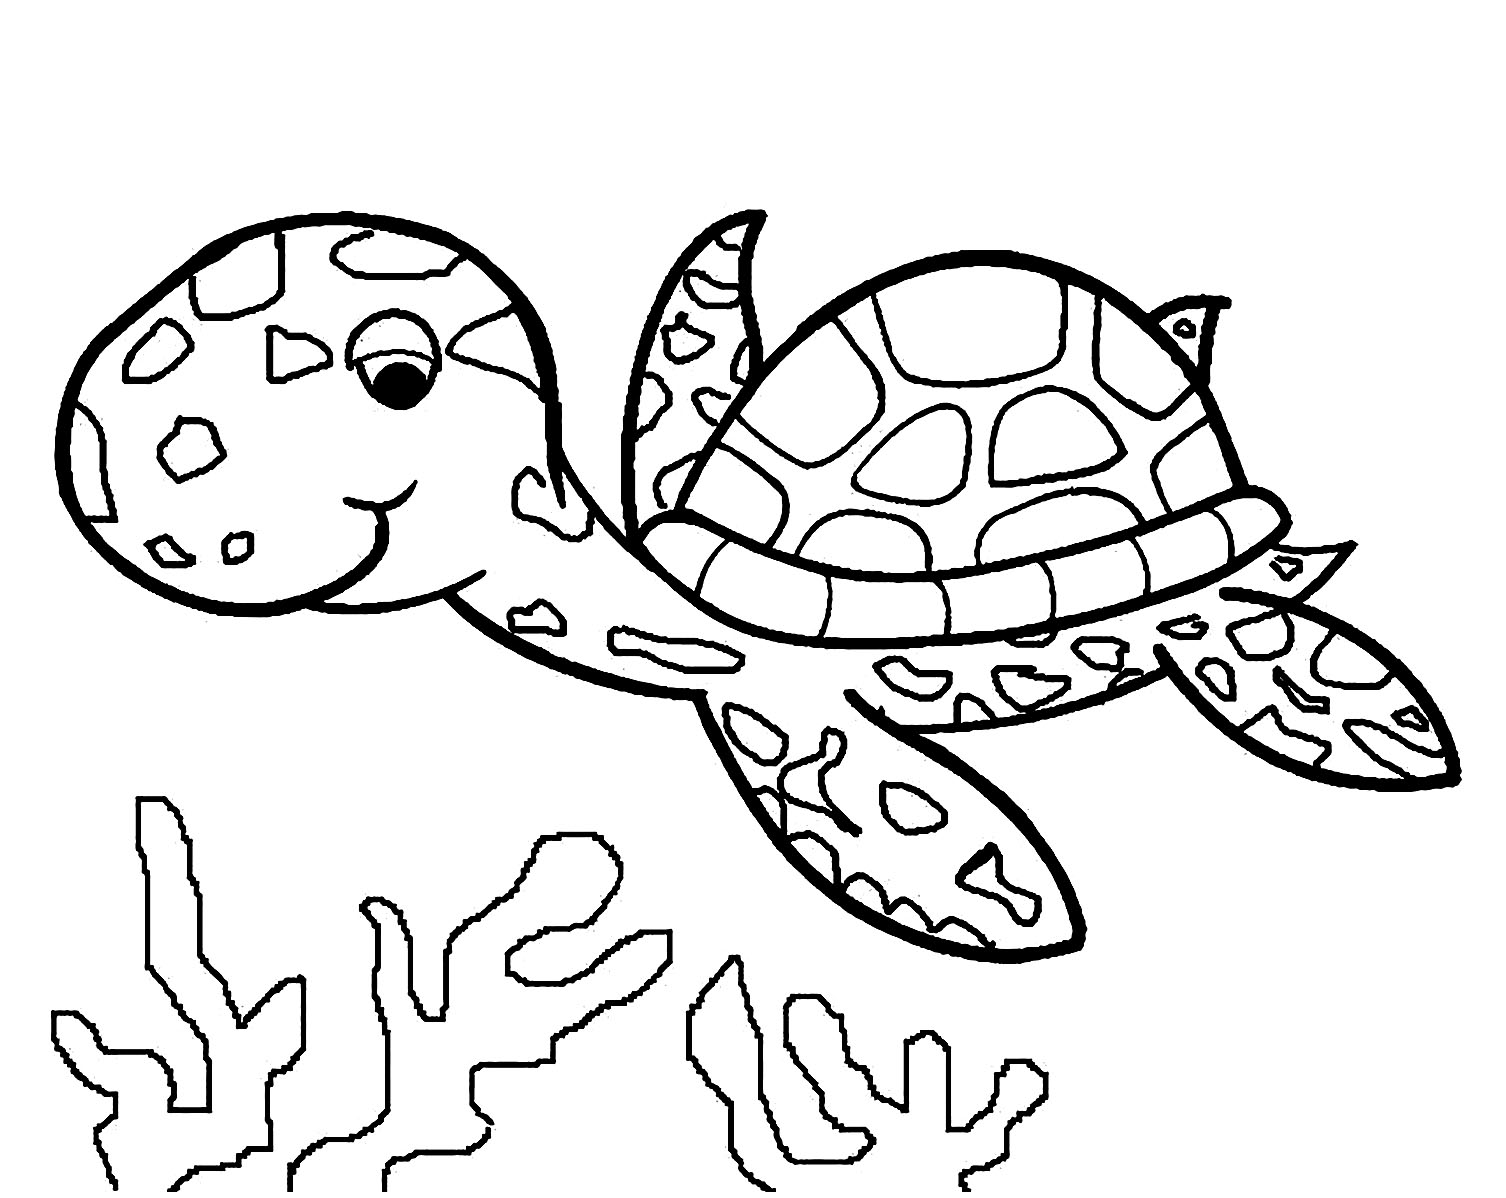 Turtle image to download and print for children